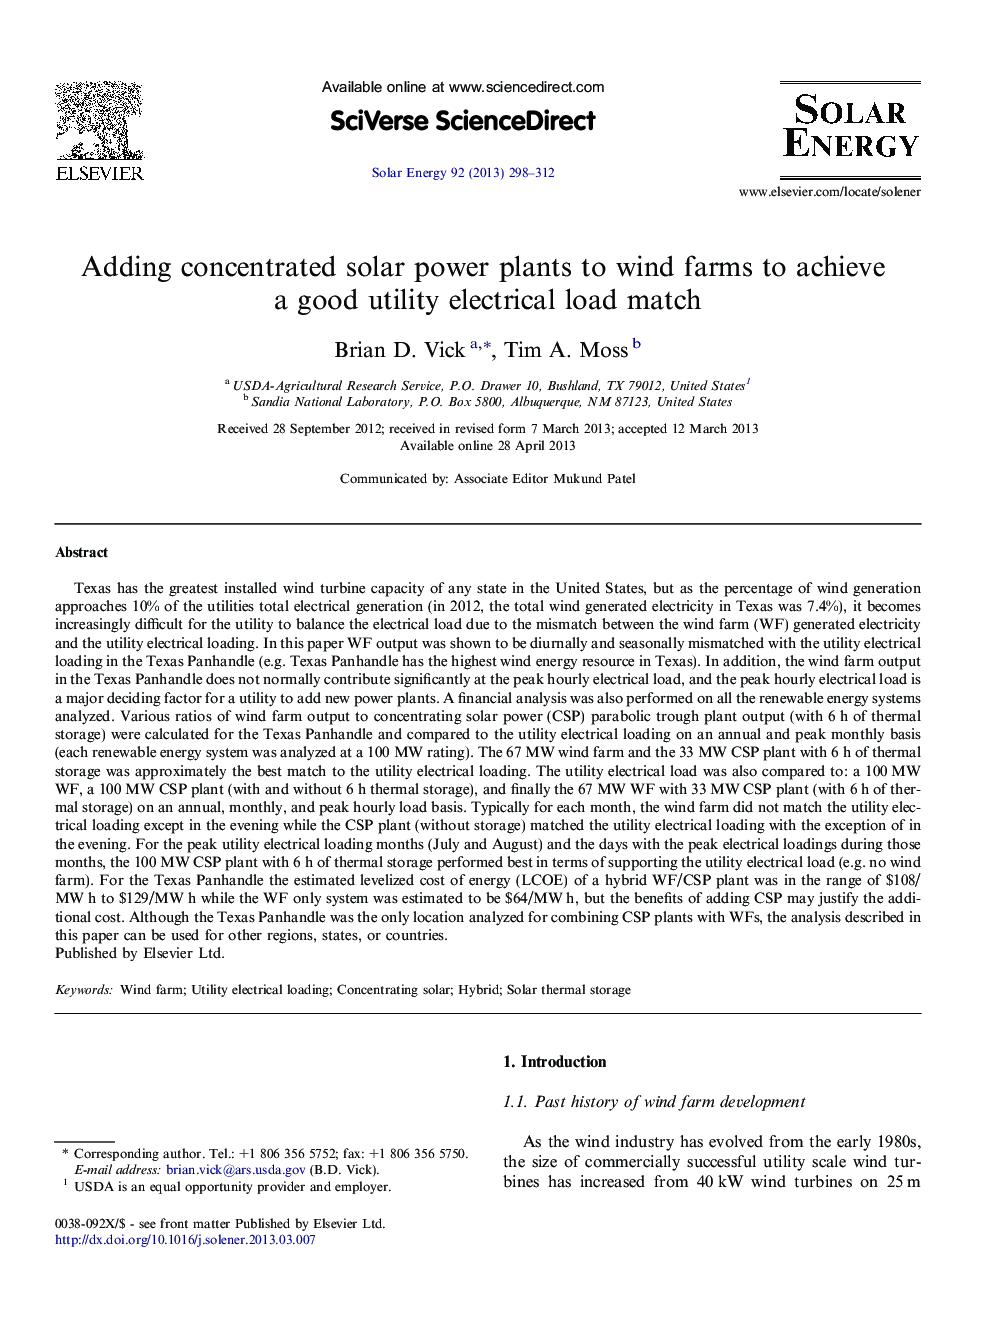 Adding concentrated solar power plants to wind farms to achieve a good utility electrical load match